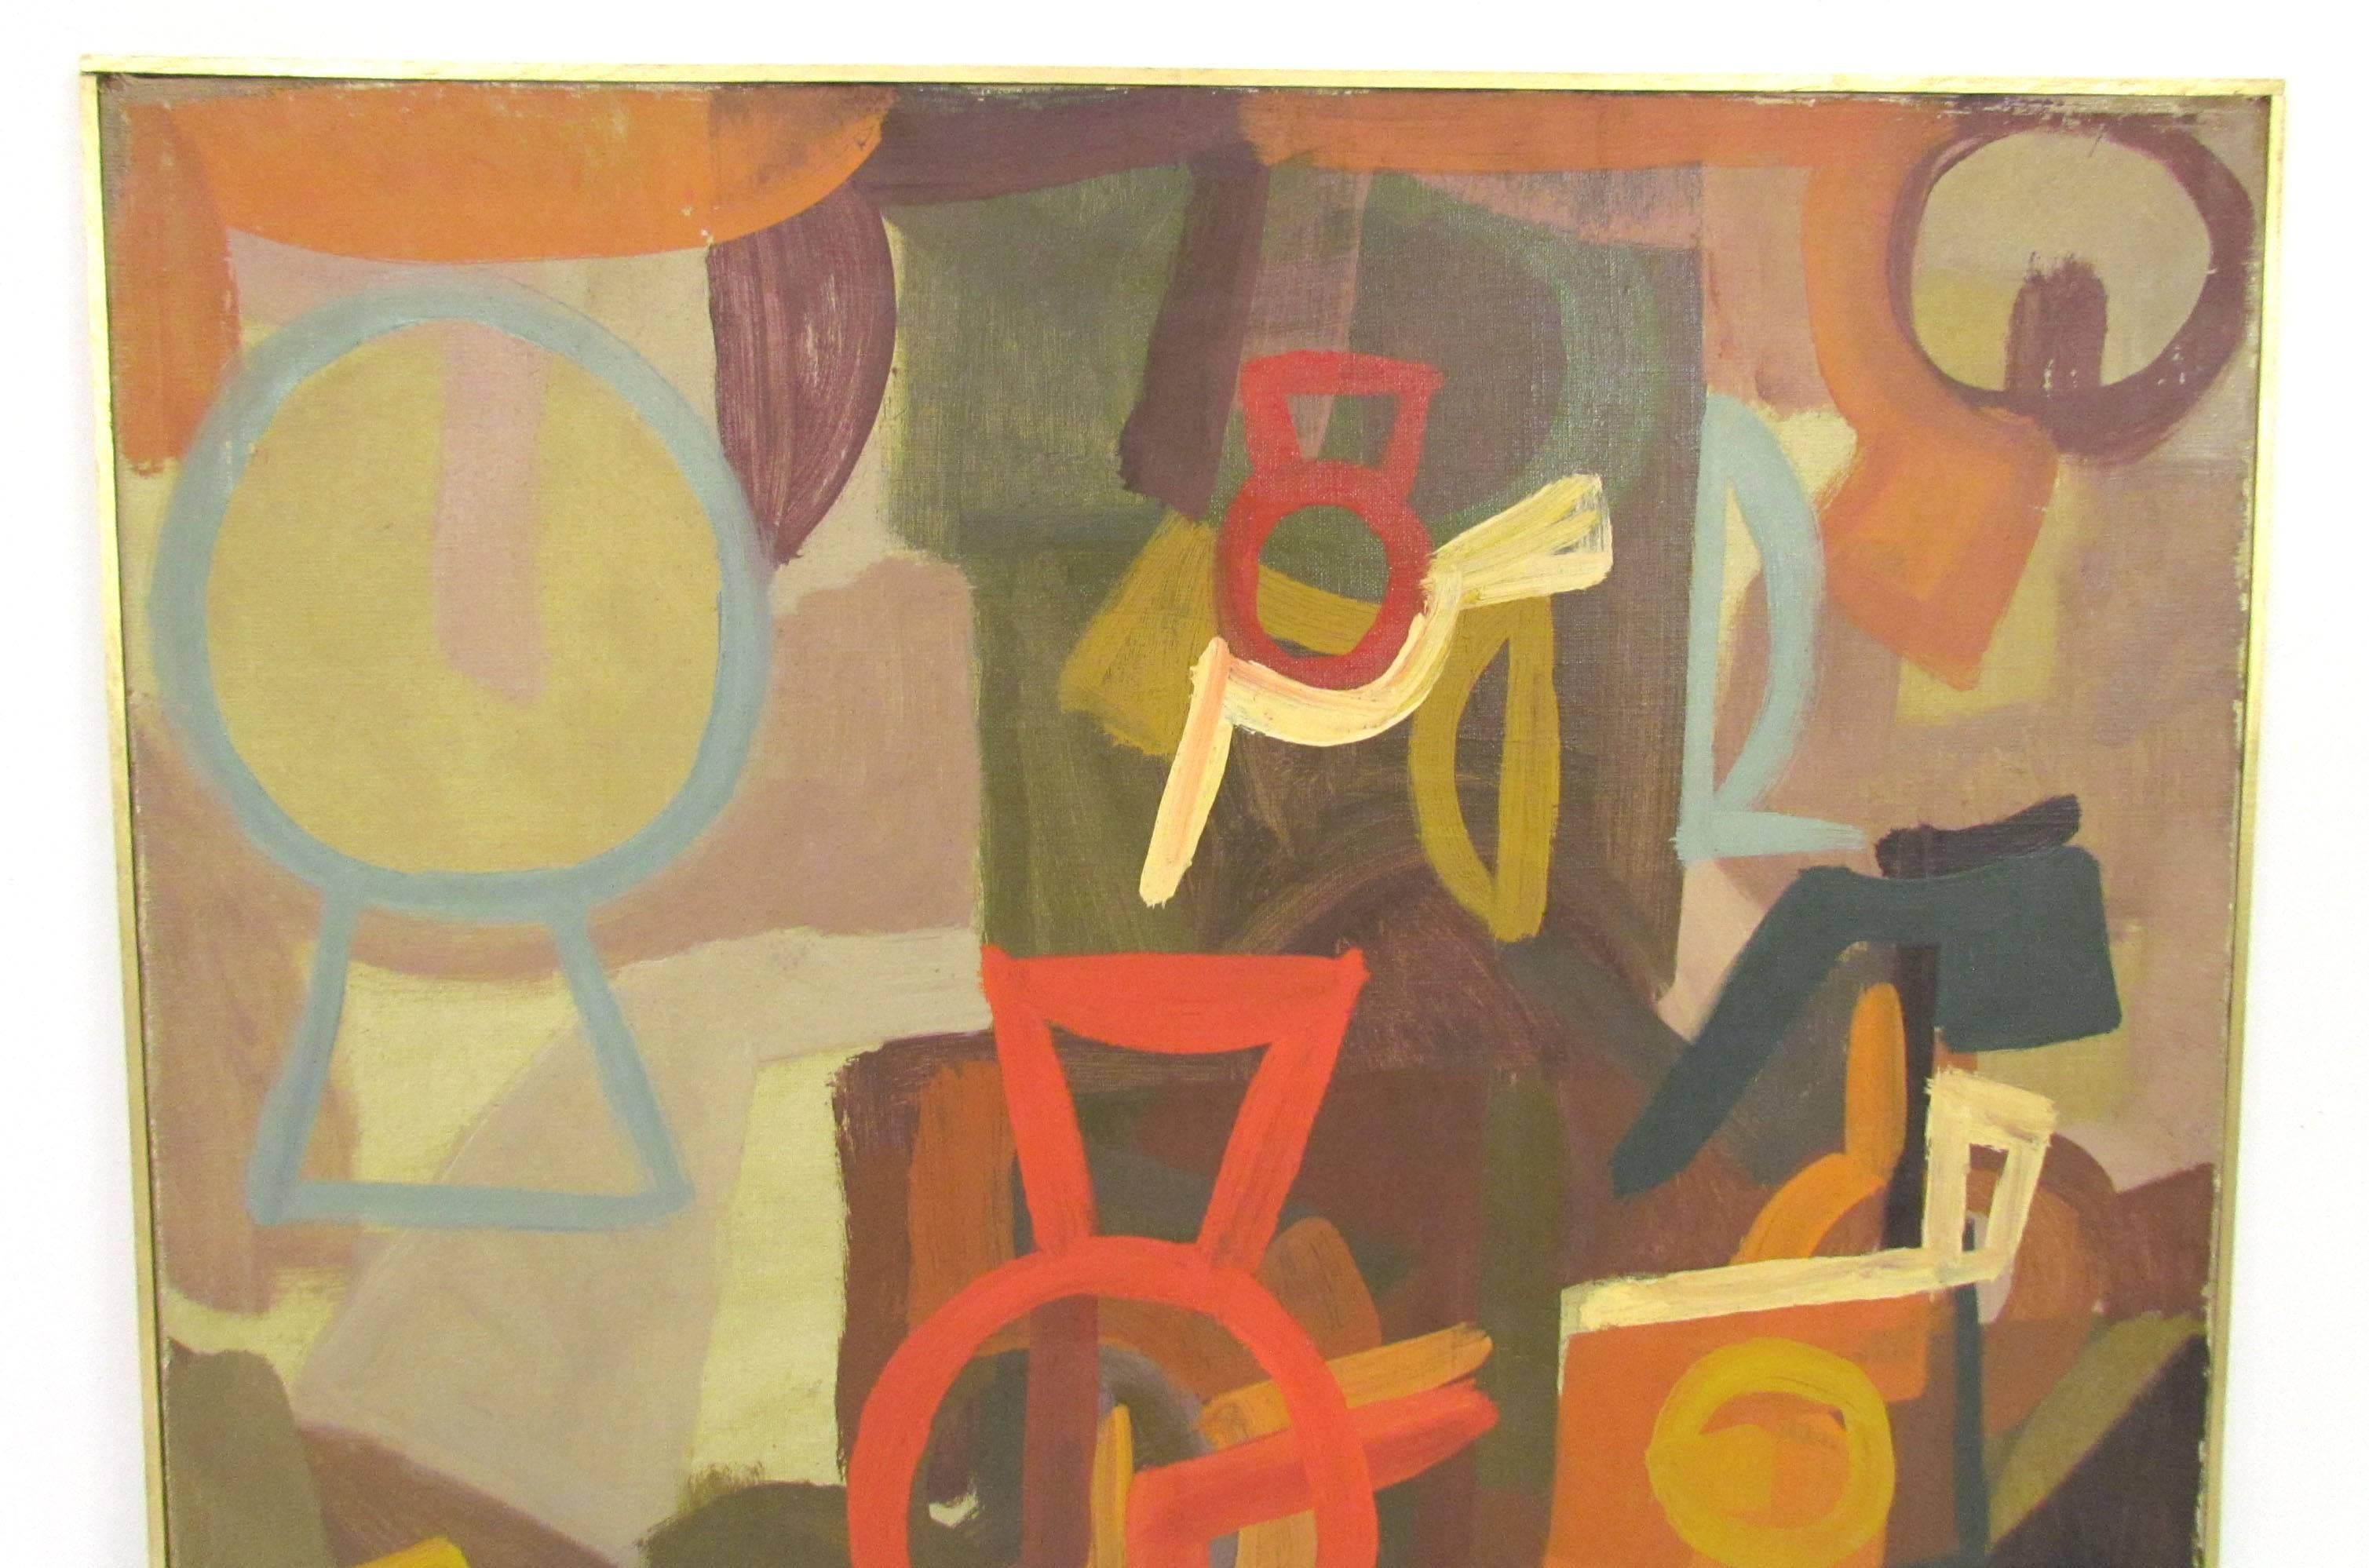 An early work of abstract symbolist painting by Harold Mesibov, dated 1955.

